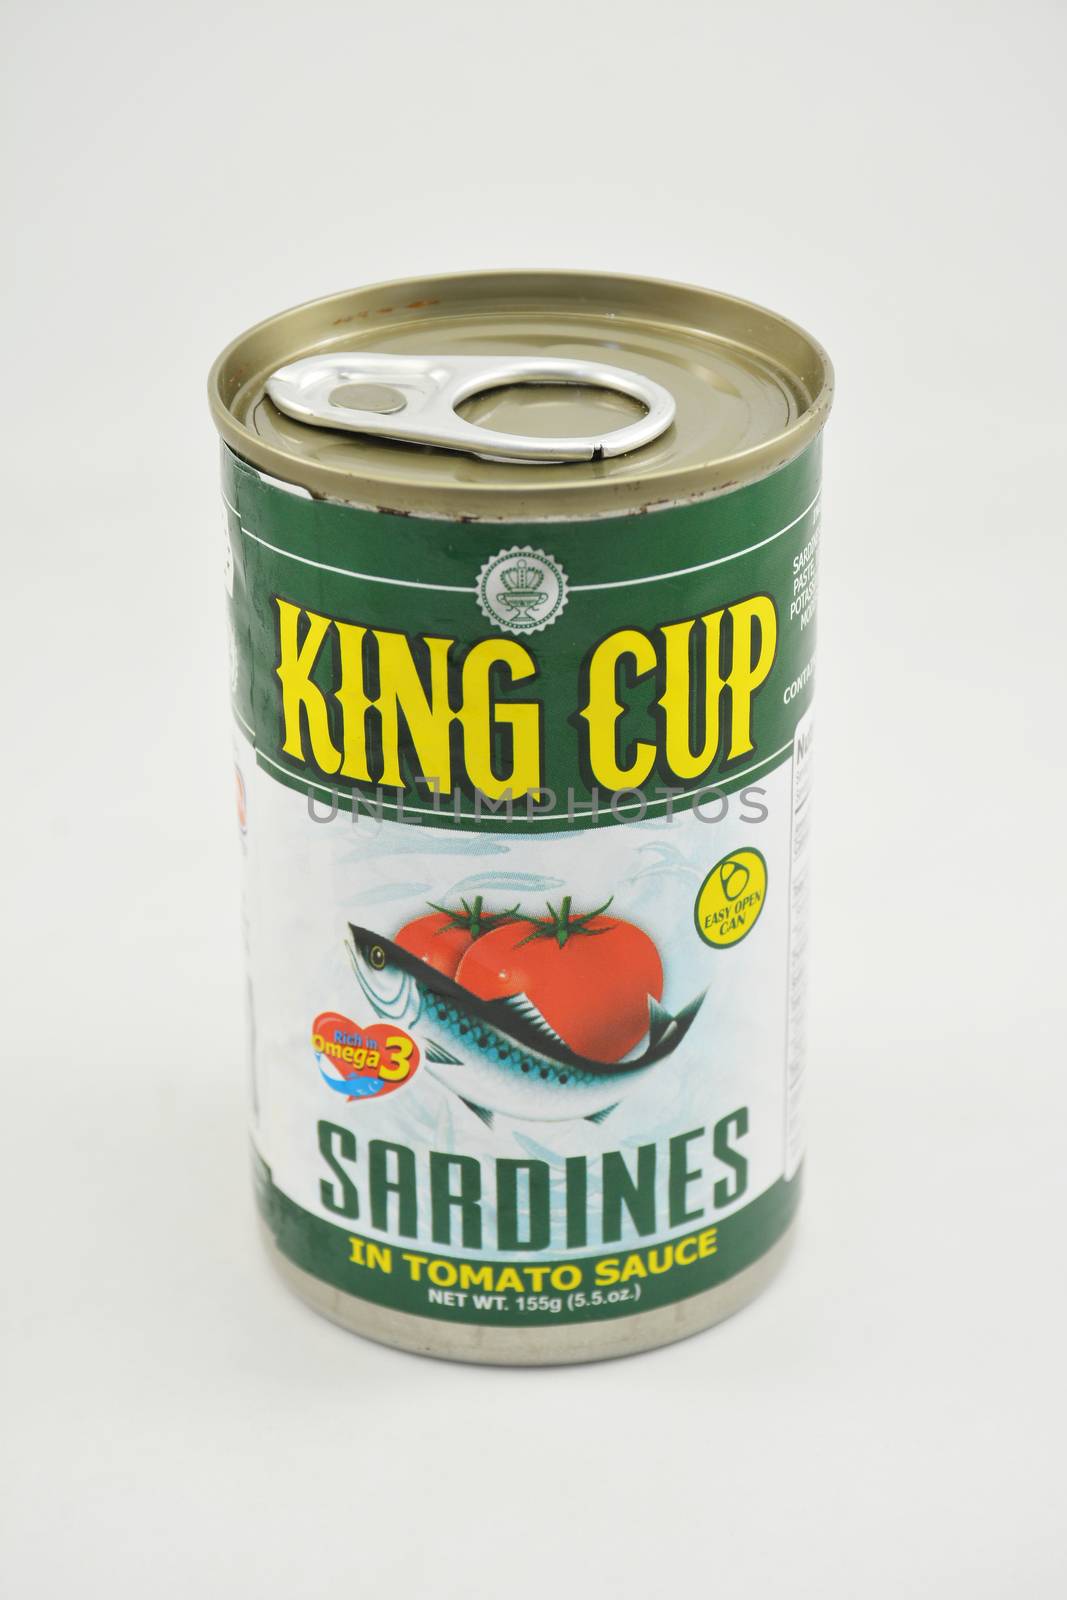 King cup sardines can in Manila, Philippines by imwaltersy